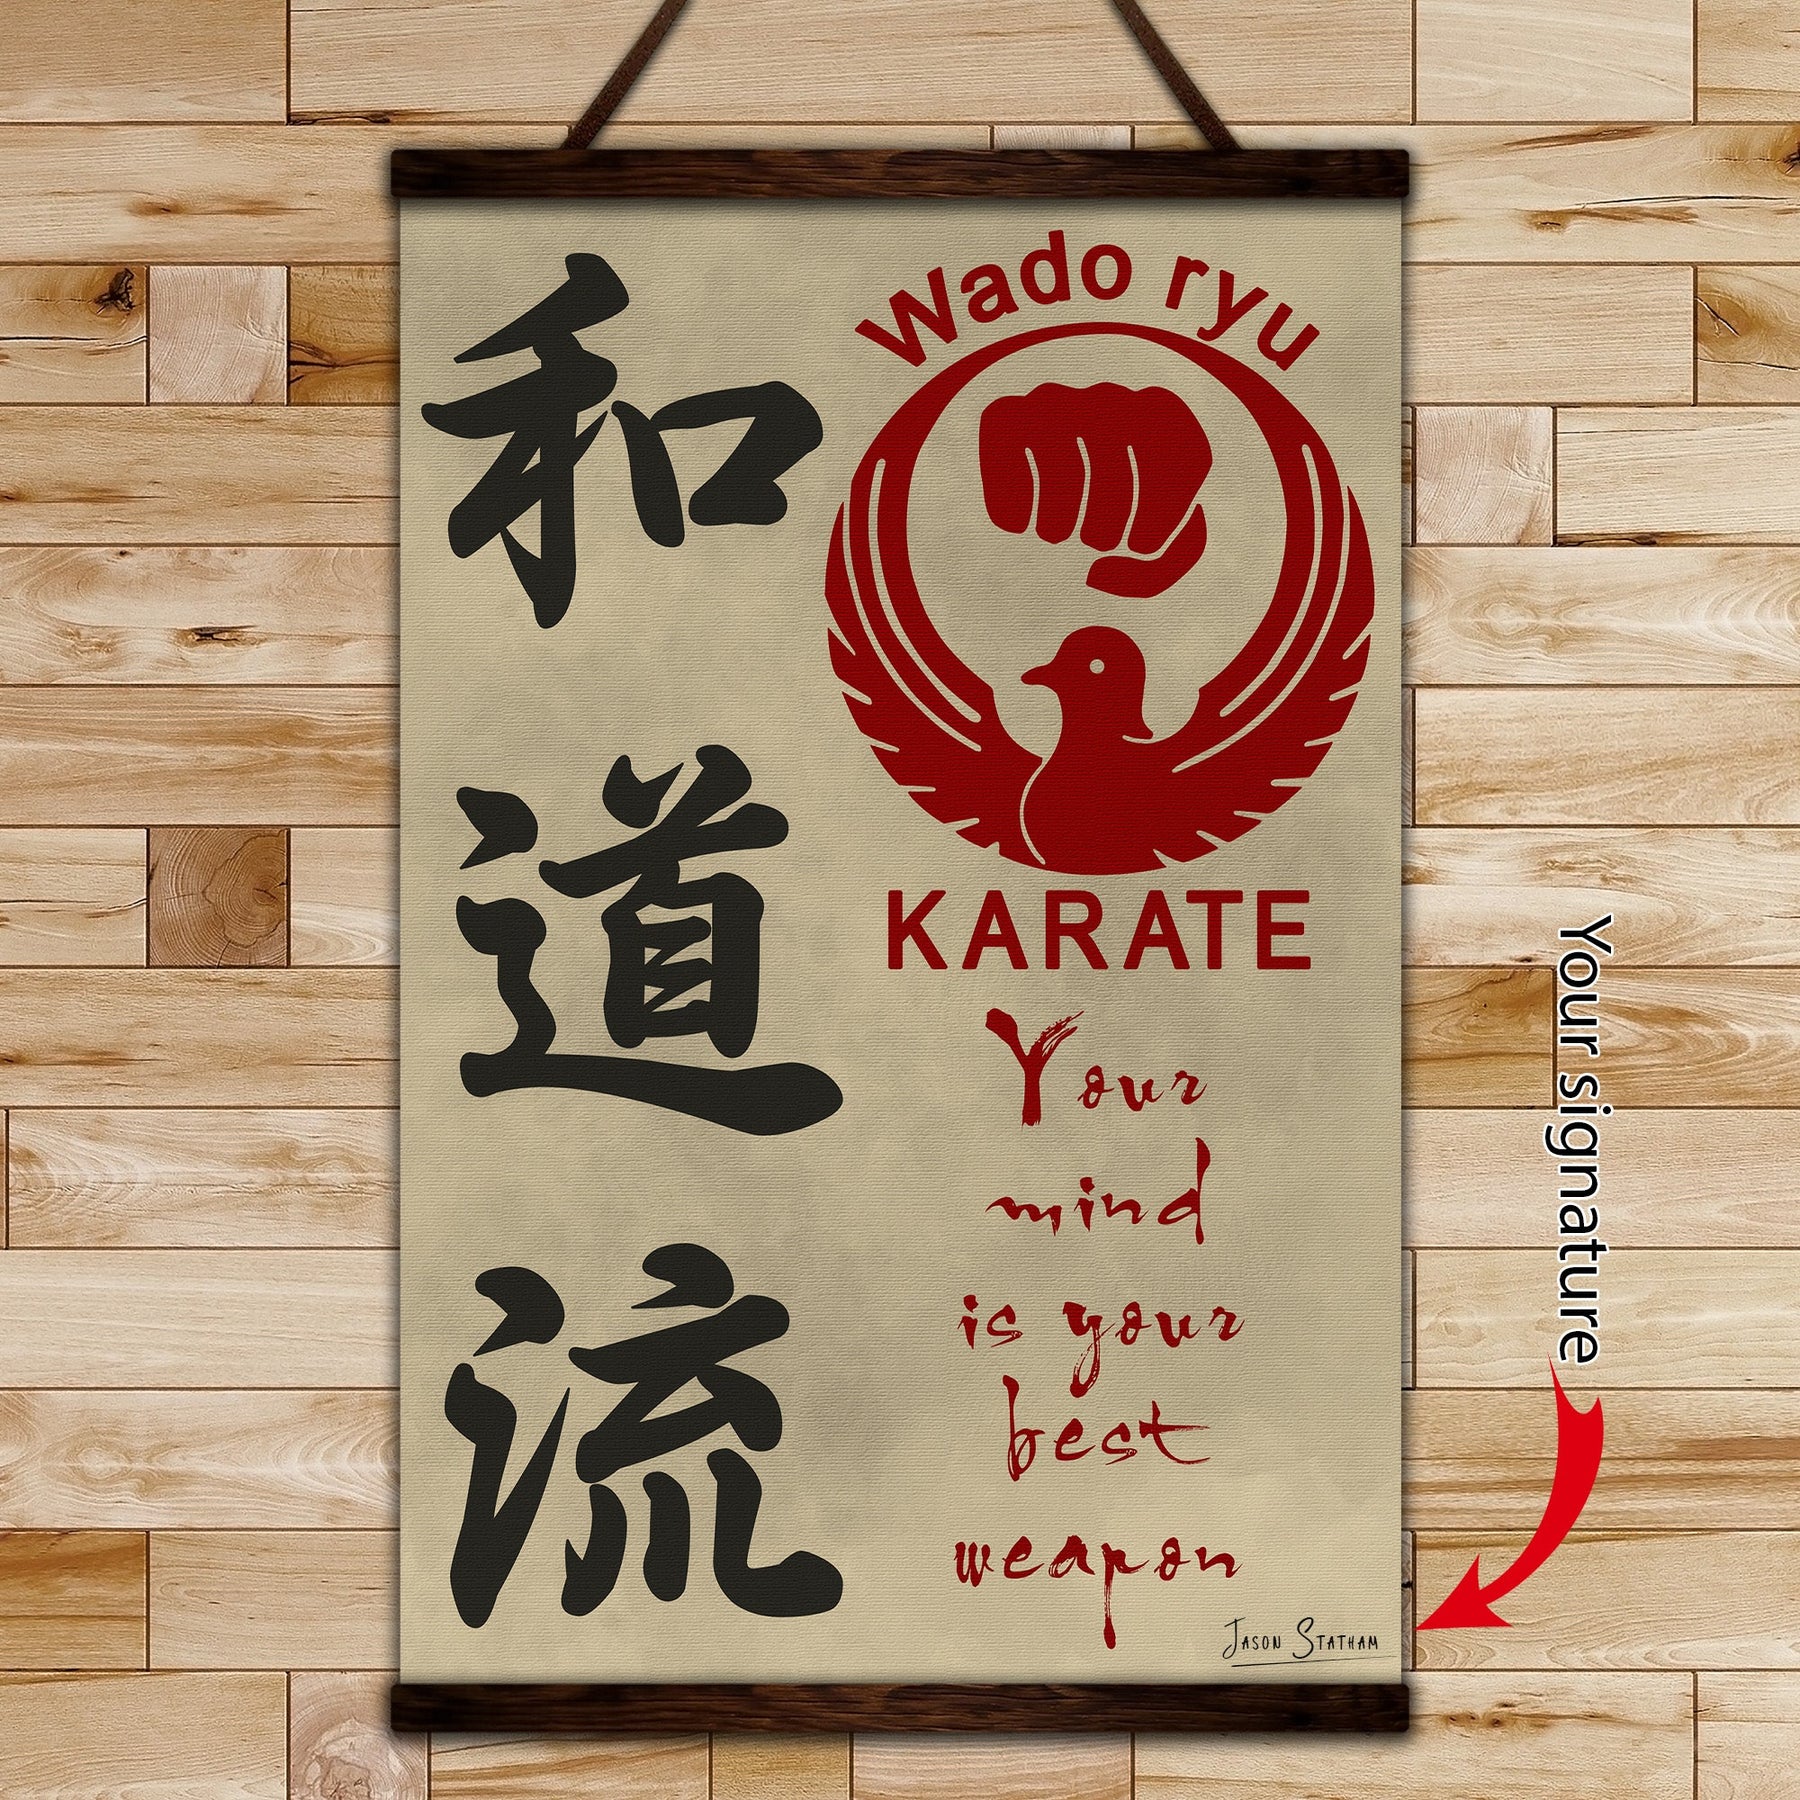 KA038 - Your Mind Is Your Best Weapon - Wado Ryu Karate - Vertical Poster - Vertical Canvas - Karate Poster